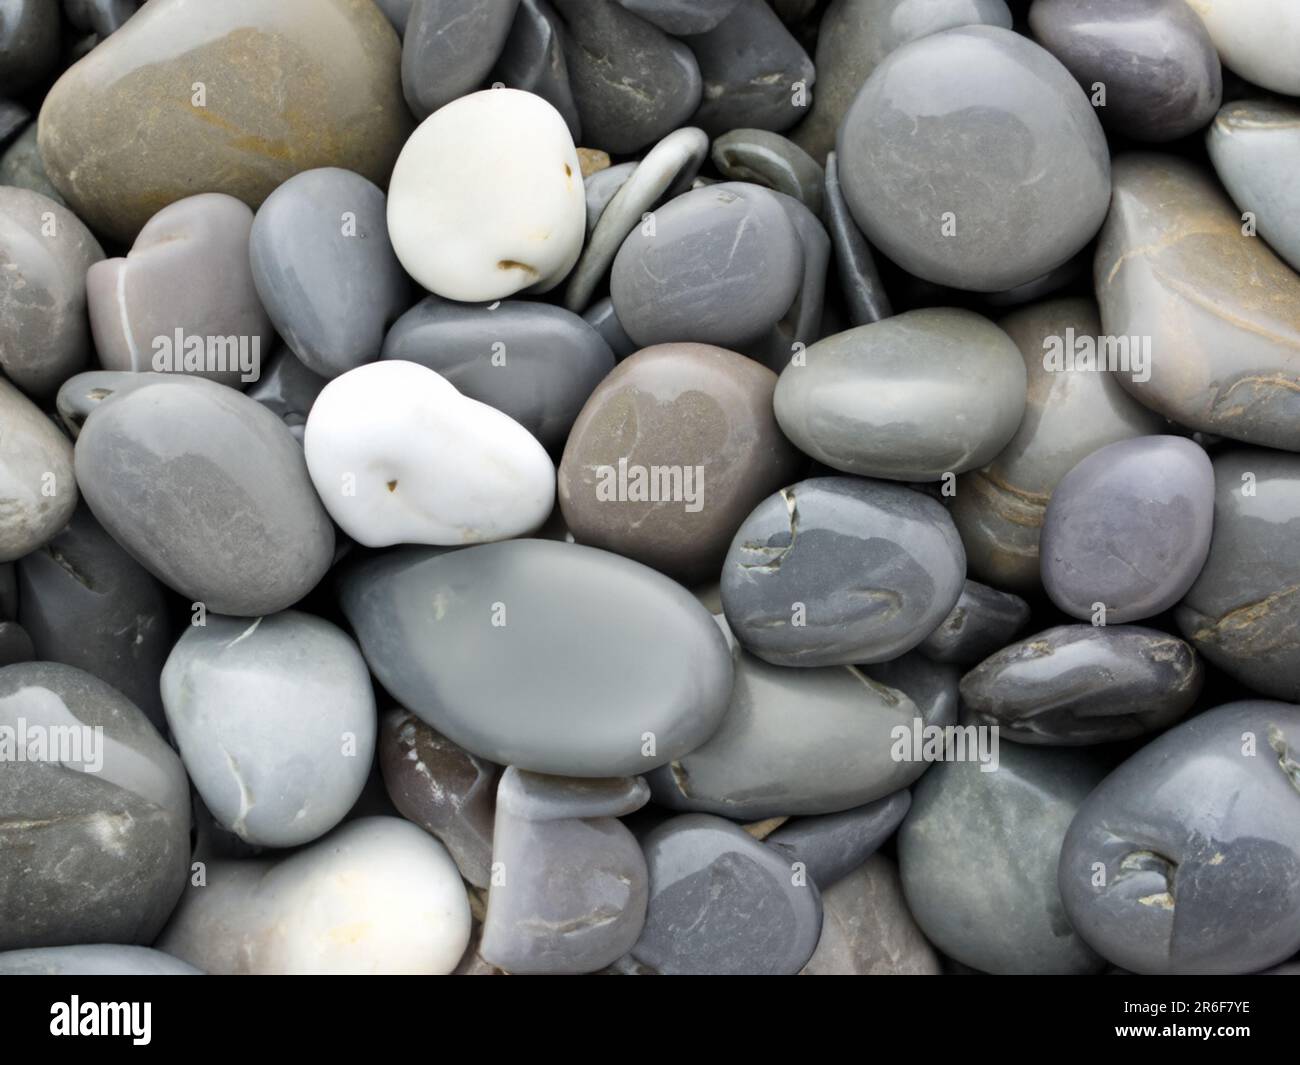 a pile of rocks with white and gray rocks on top. . Stock Photo